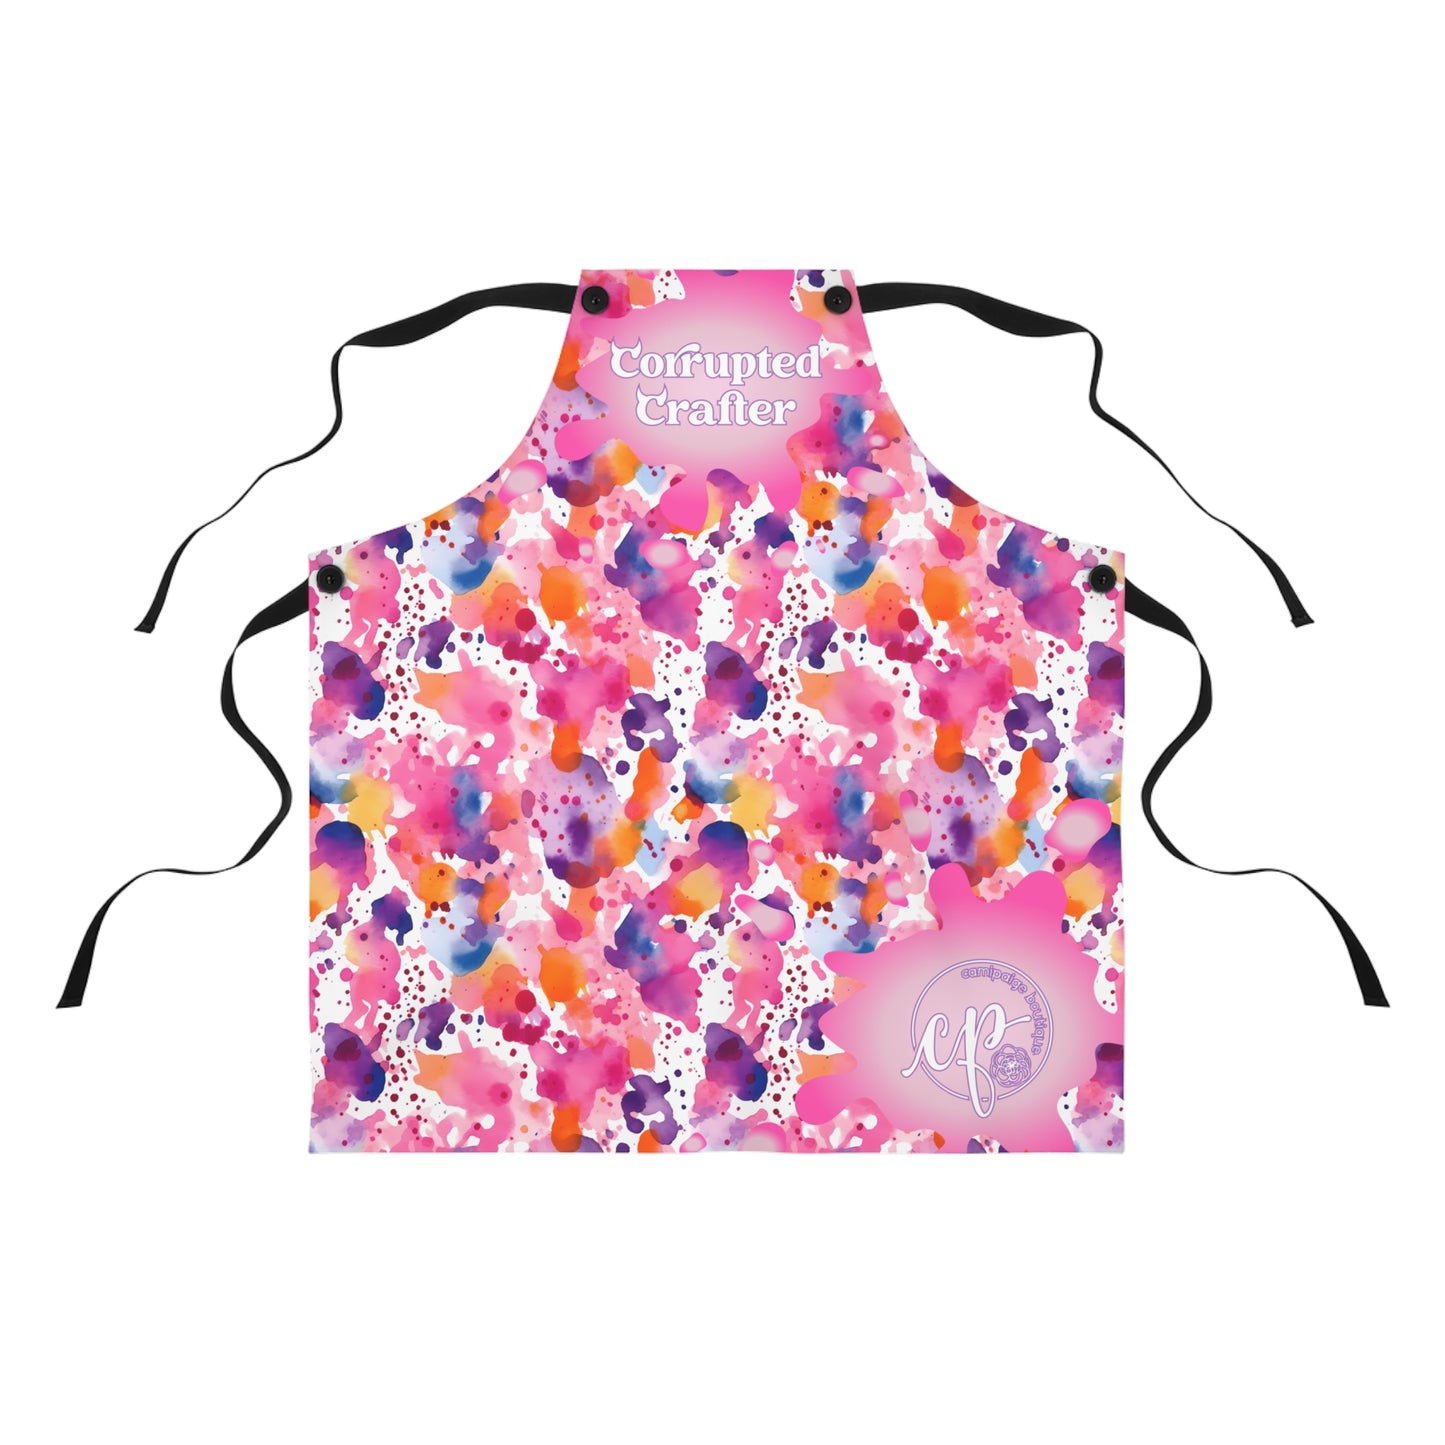 Corrupted Crafters Crafting Apron from CamiPaige Boutique